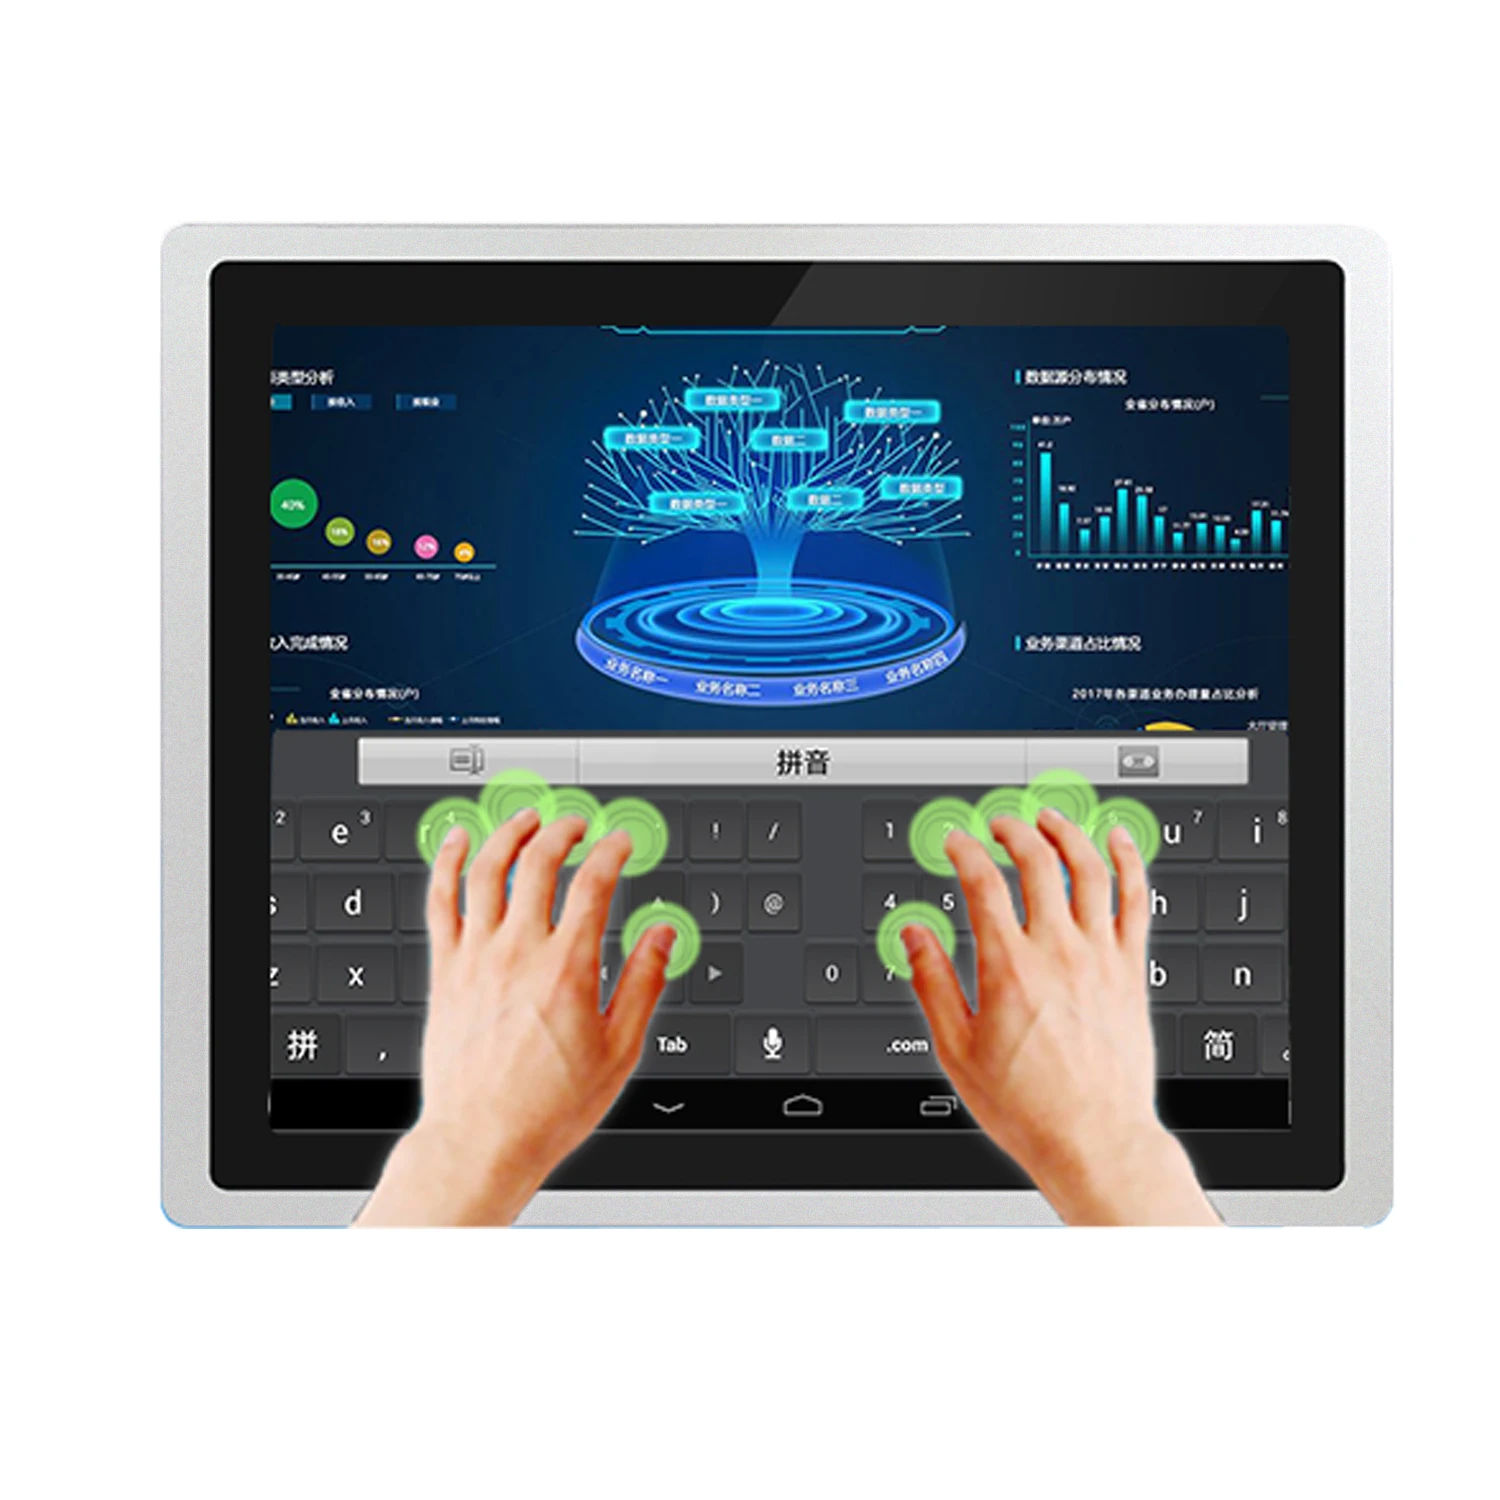 15 inch embedded IPC all-in-one PC capacitive touch screen industrial mini tablet computer built-in WiFi with HD panel 1024*768 enlarge